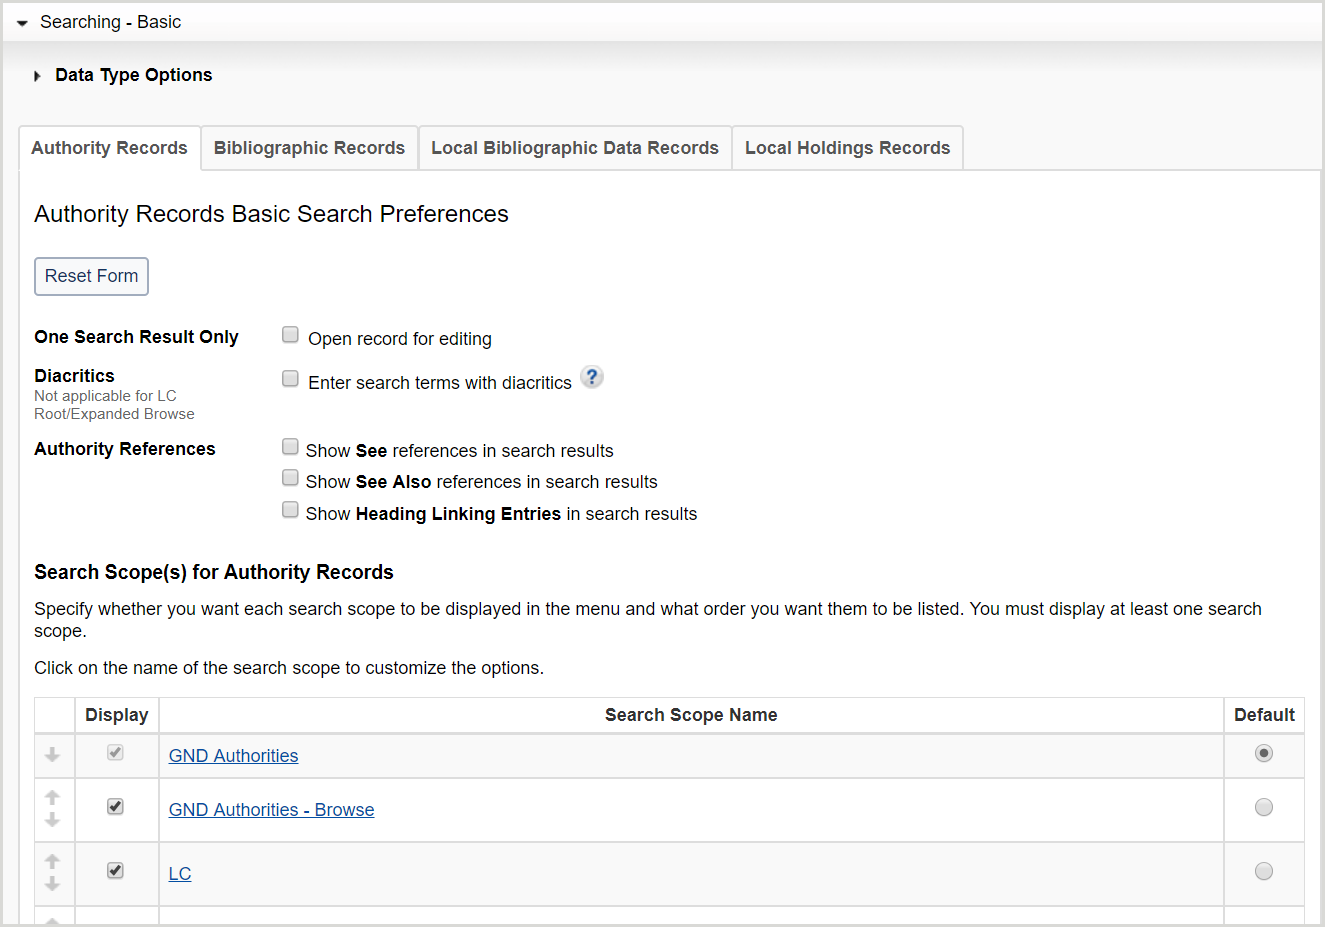 Basic searching - Authority records